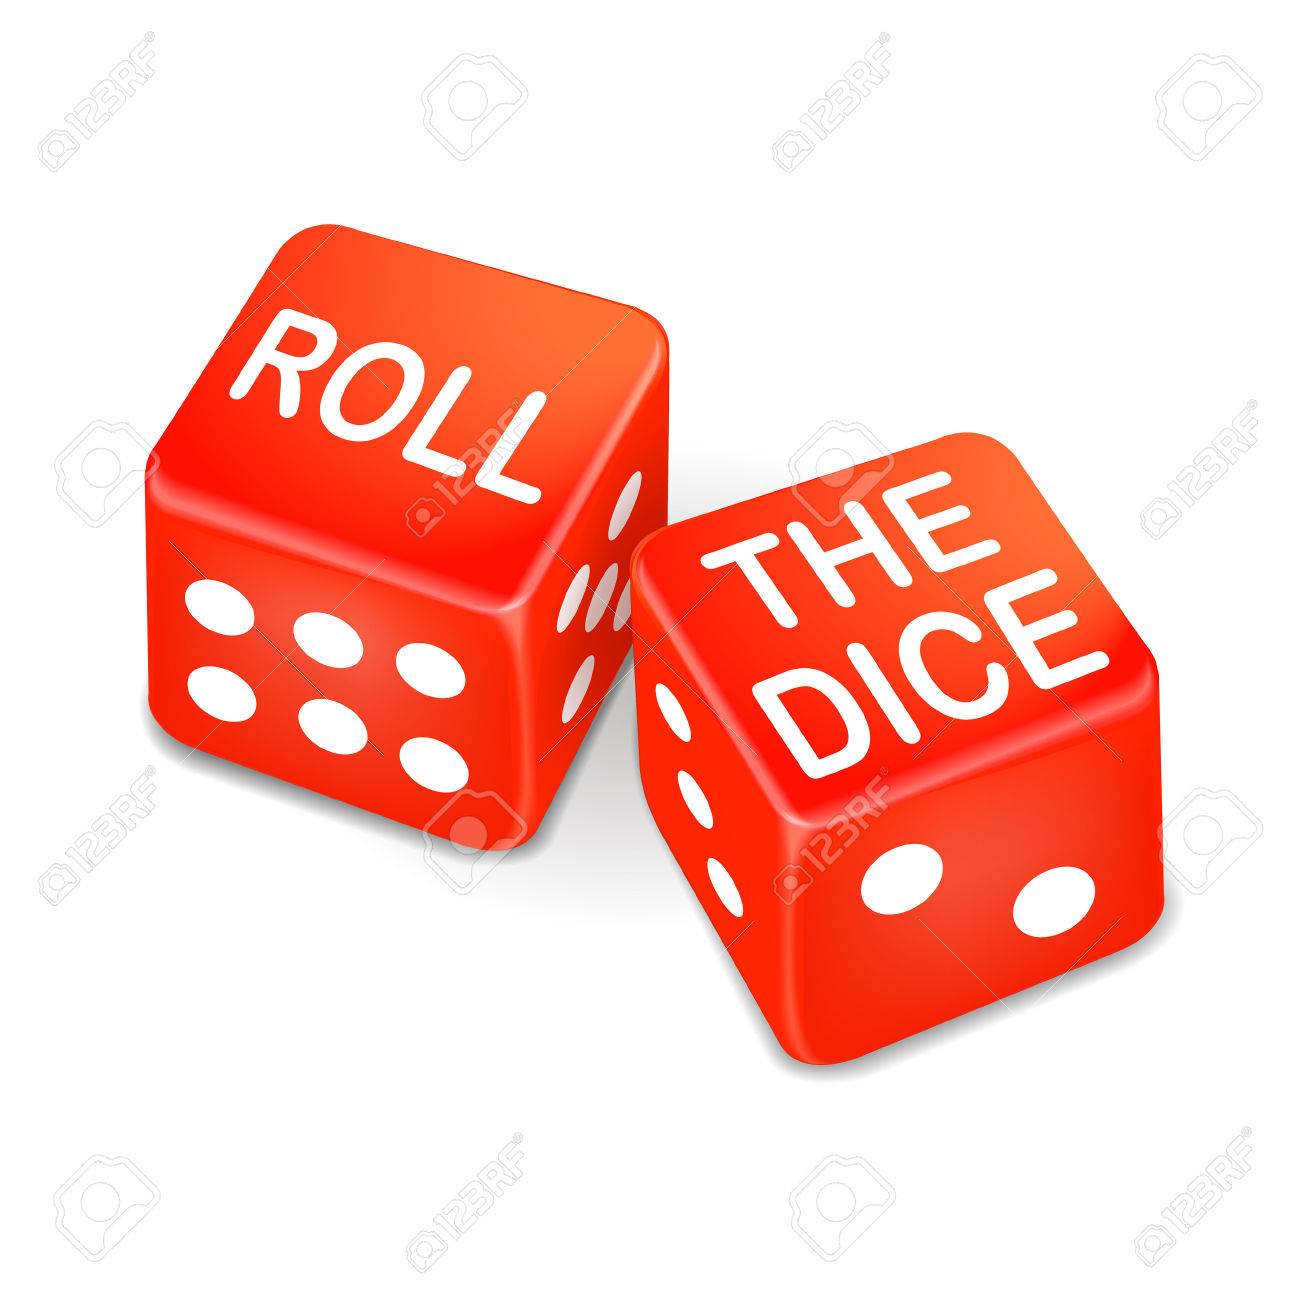 Roll the Dice!